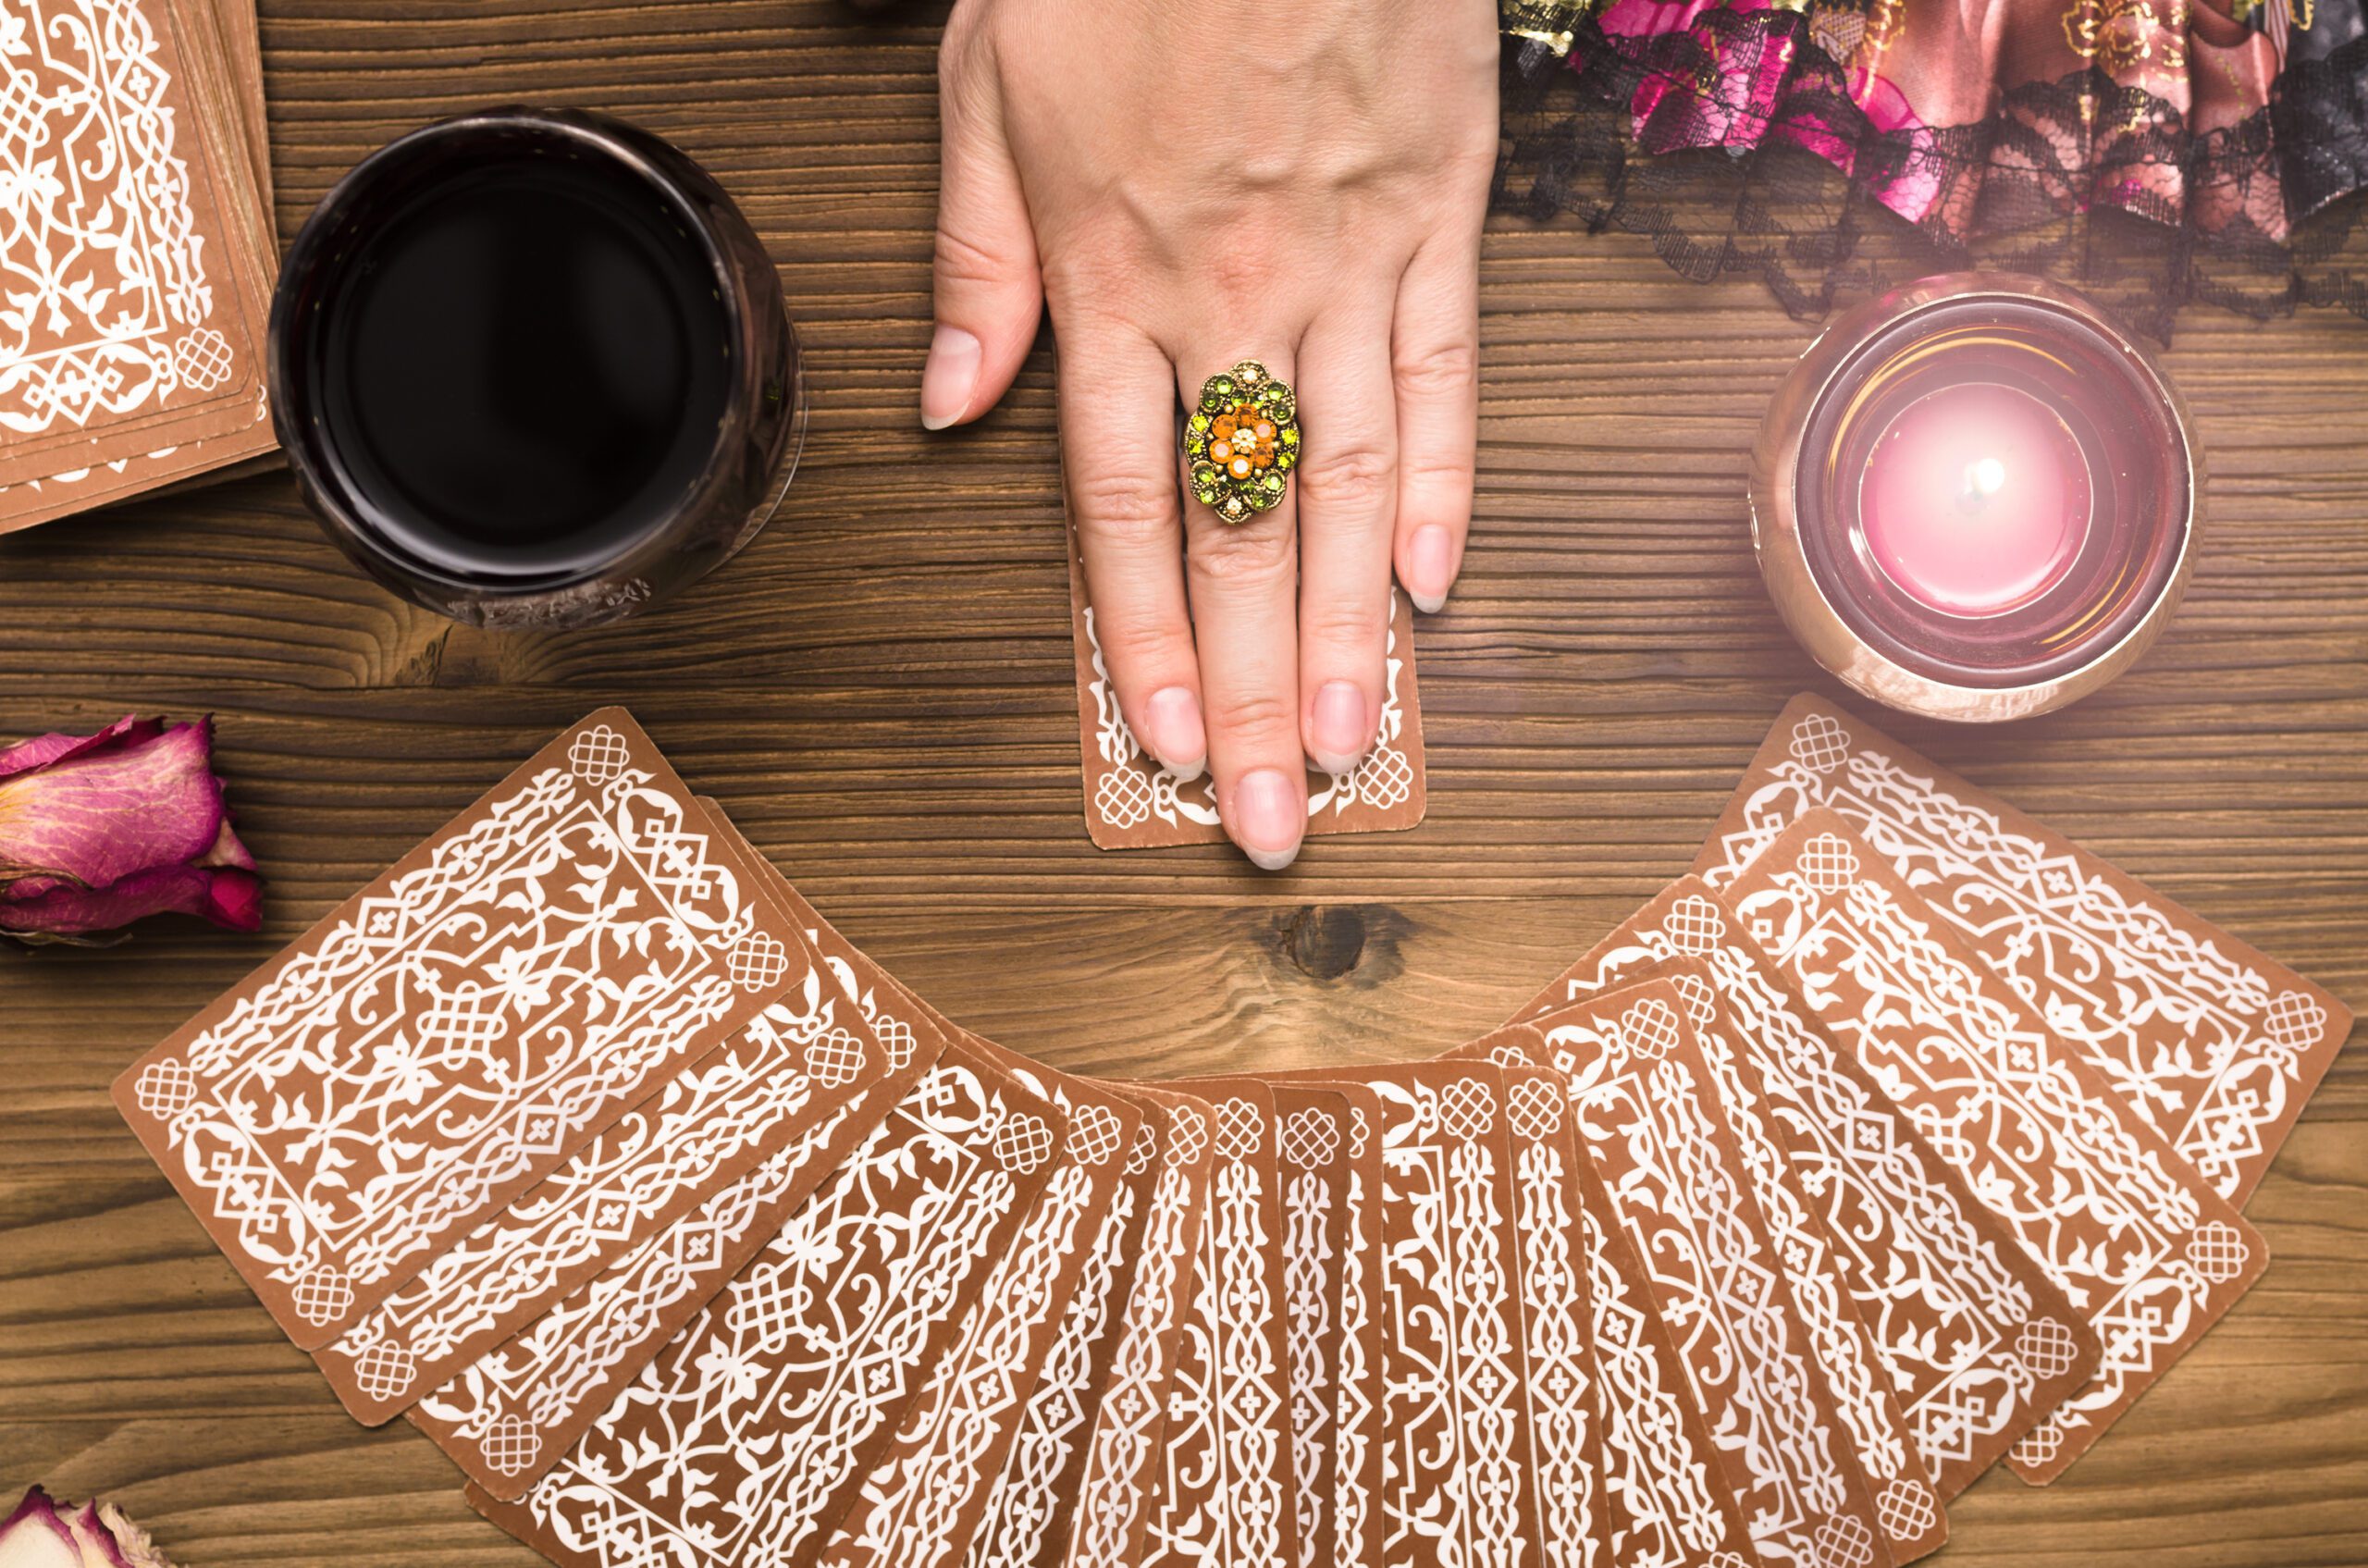 Fortune teller female hands and tarot cards on wooden table